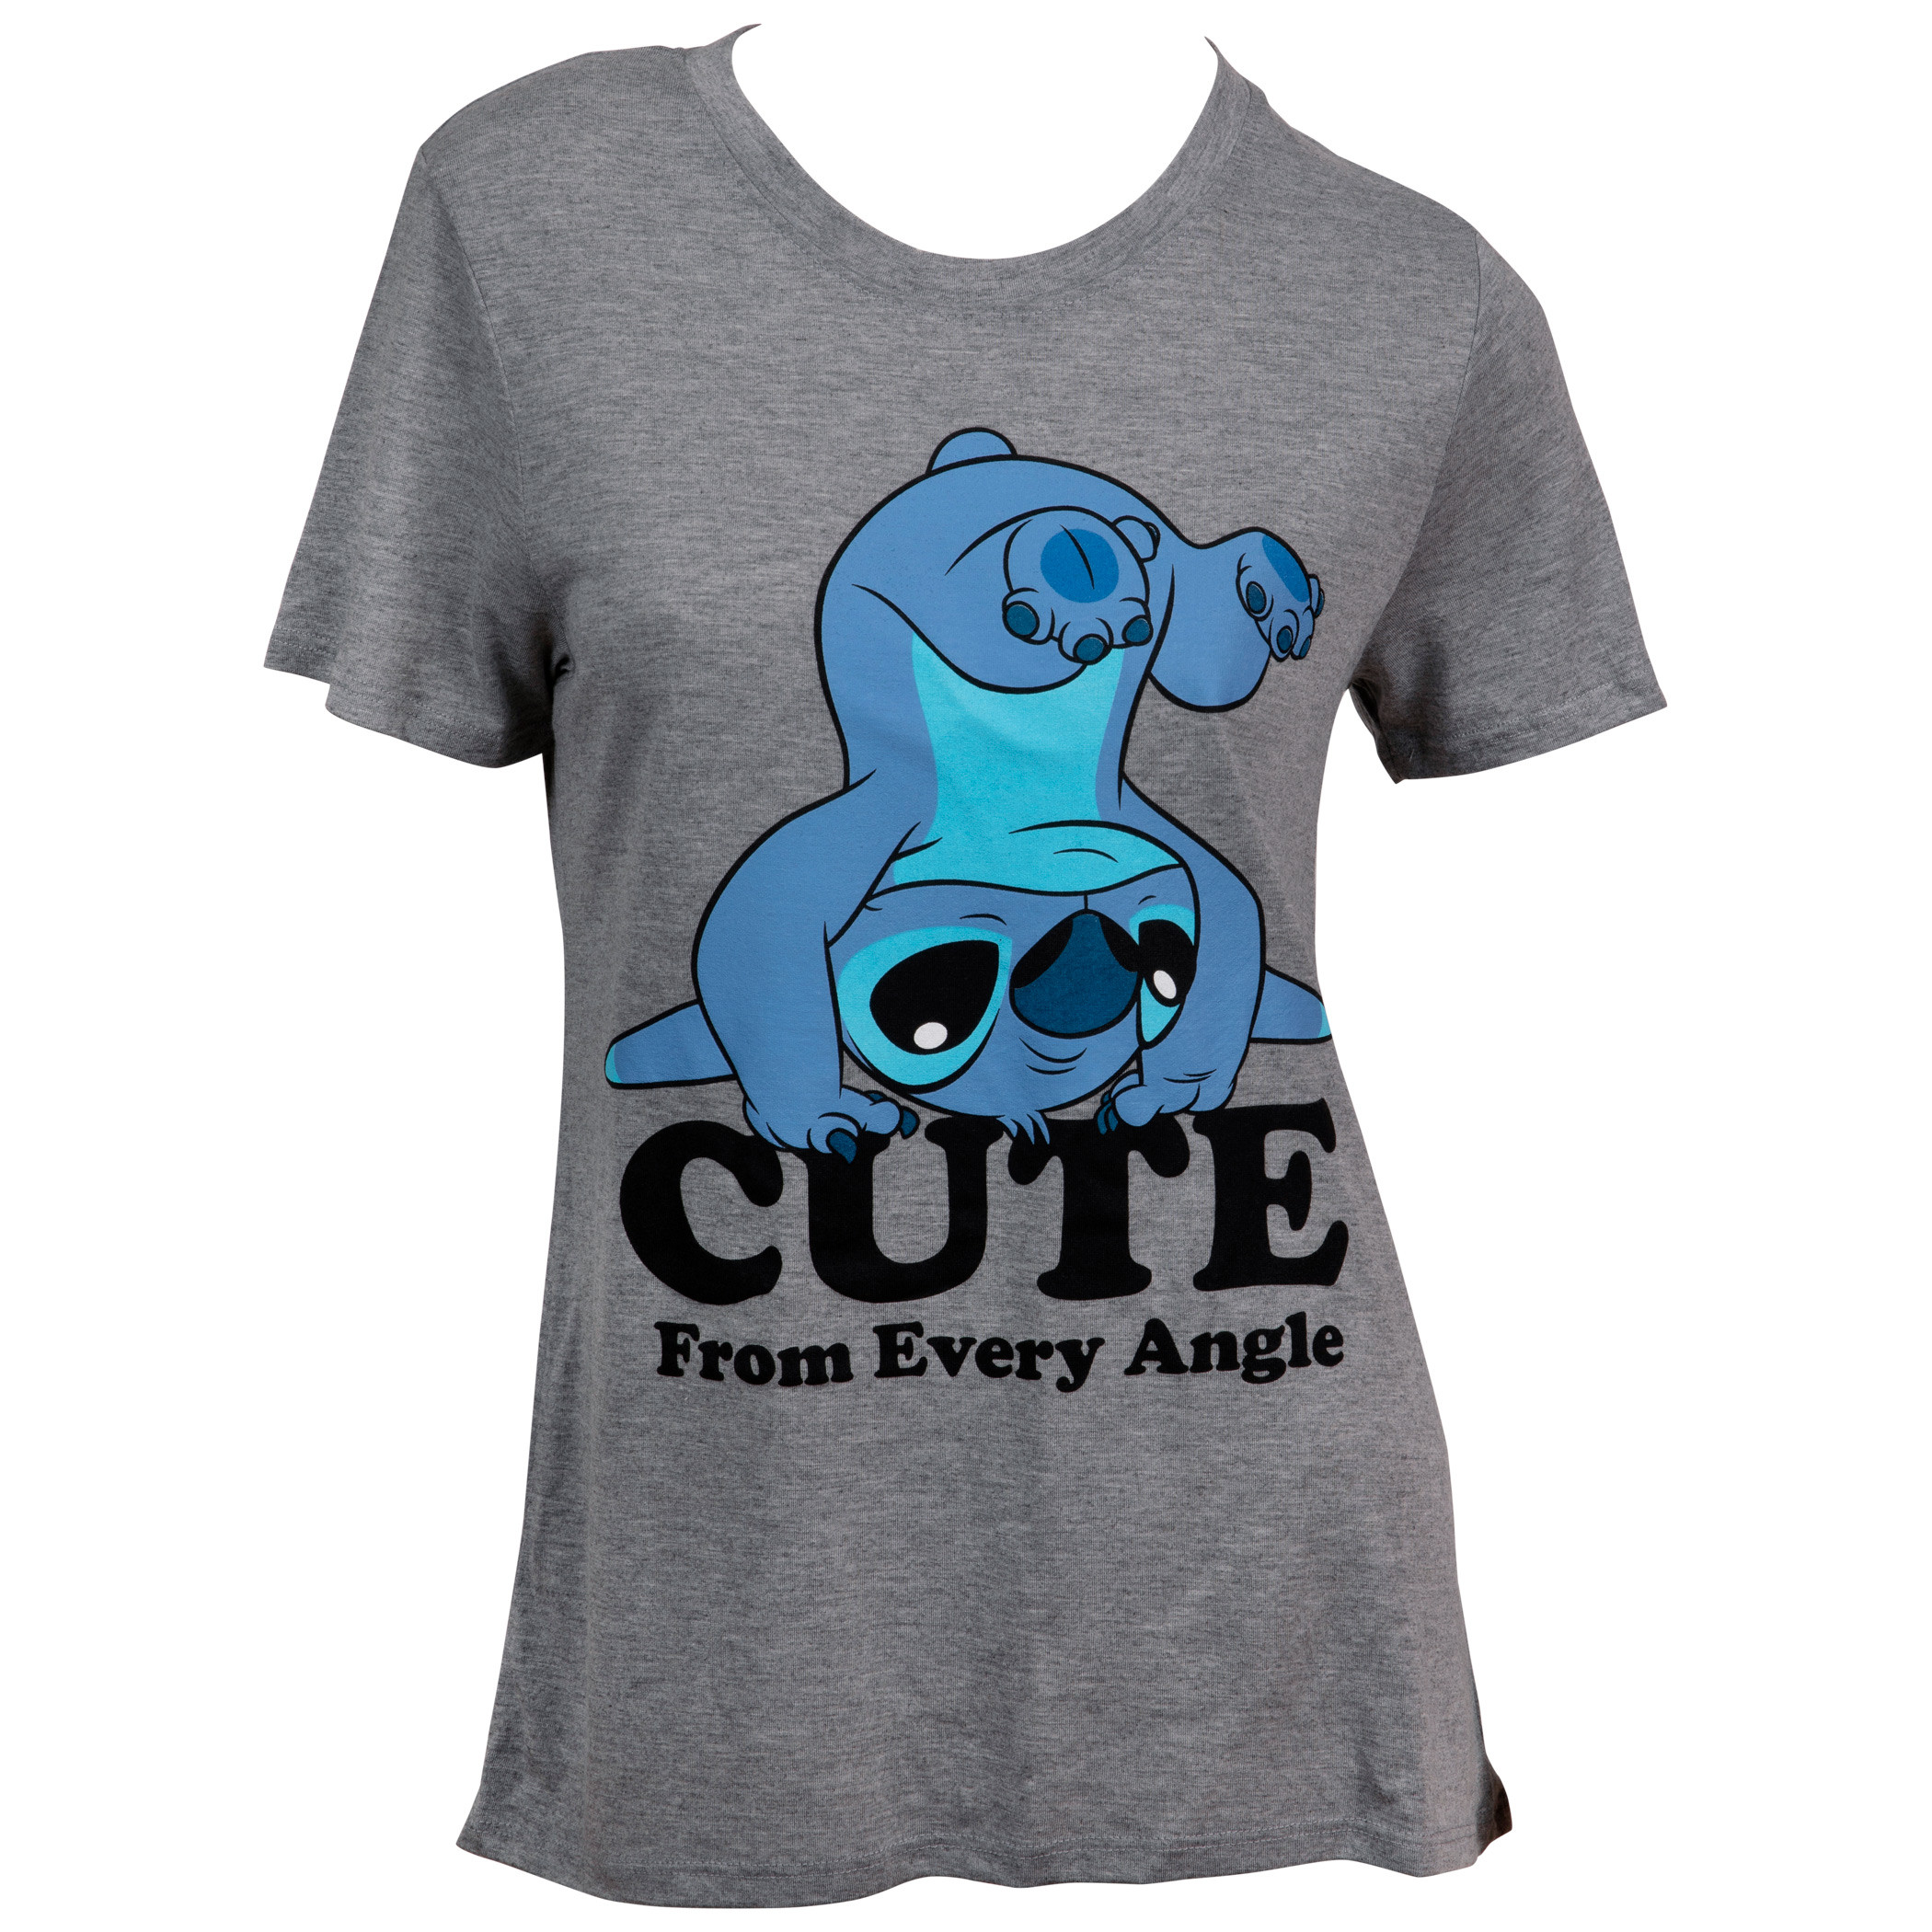 Disney Stitch Cute From Every Angle Crew Neck Juniors T-Shirt